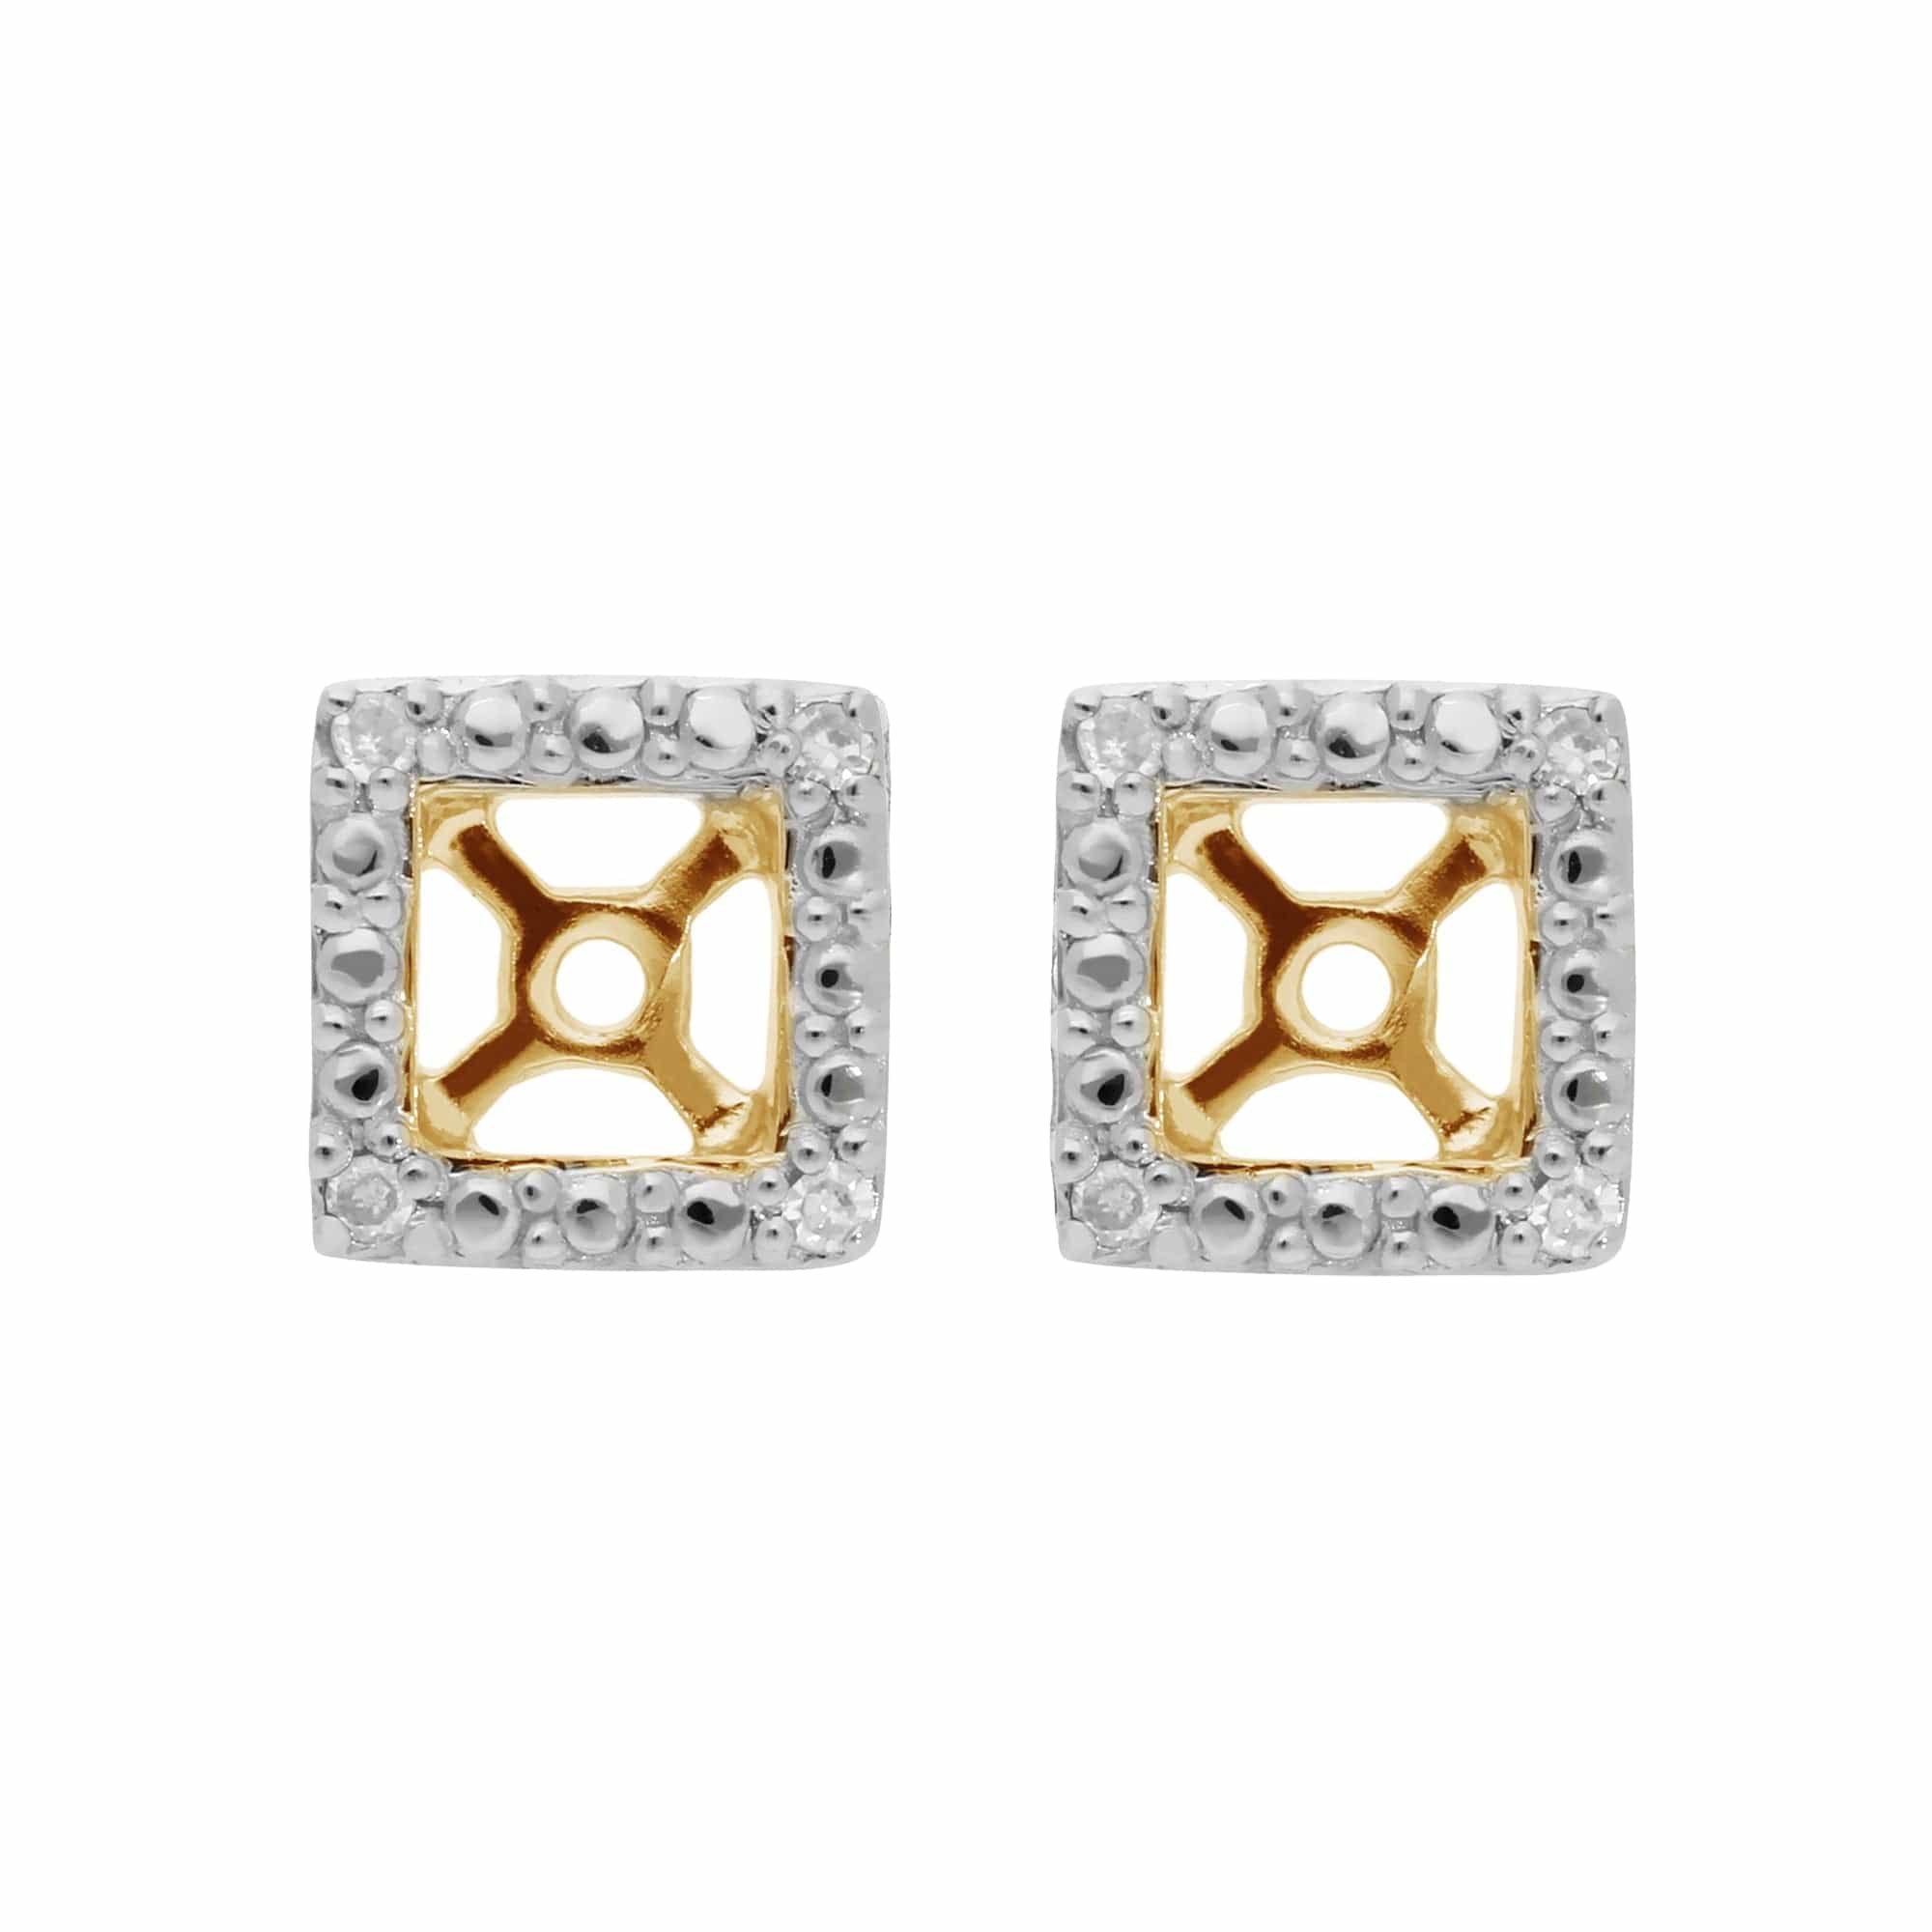 Classic Round Blue Topaz Stud Earrings with Detachable Diamond Square Earrings Jacket Set in 9ct Yellow Gold - Gemondo